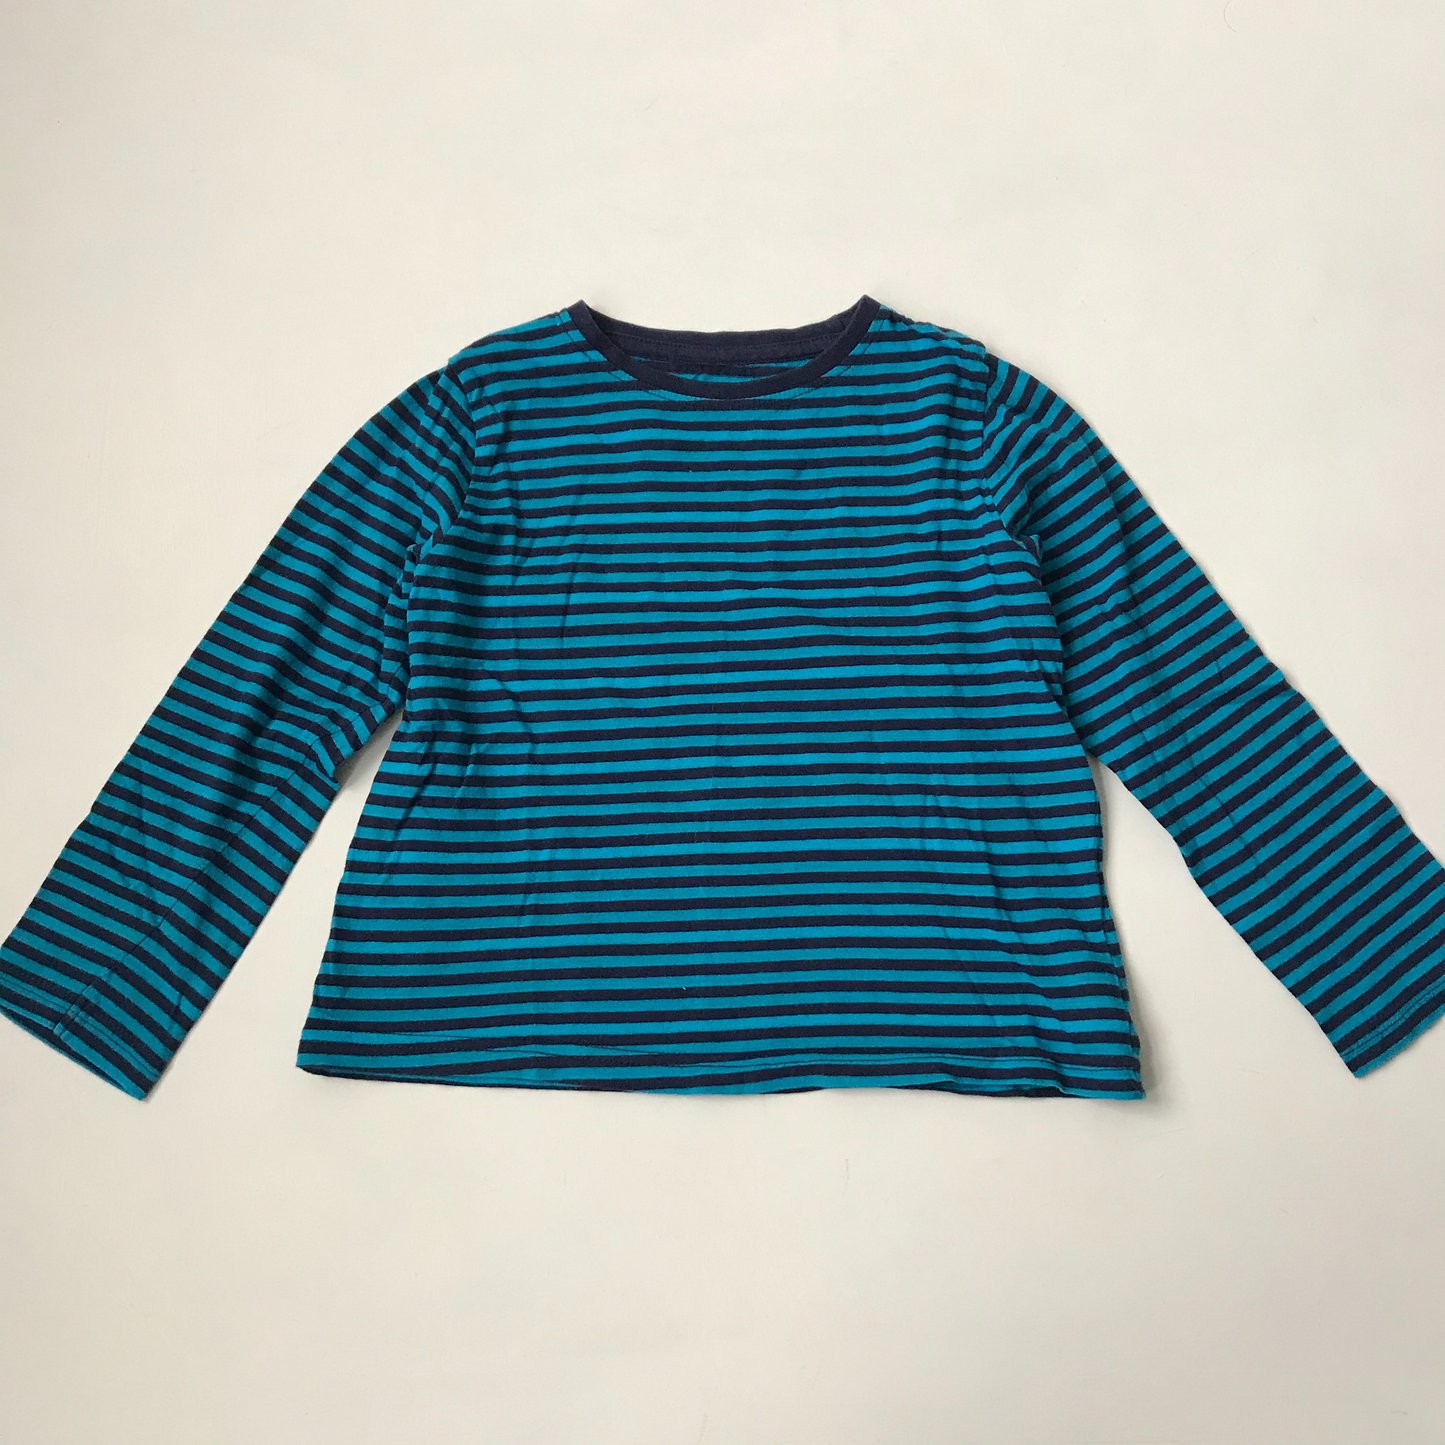 T-shirt - Blue Long Sleeve with Stripes - Age 4